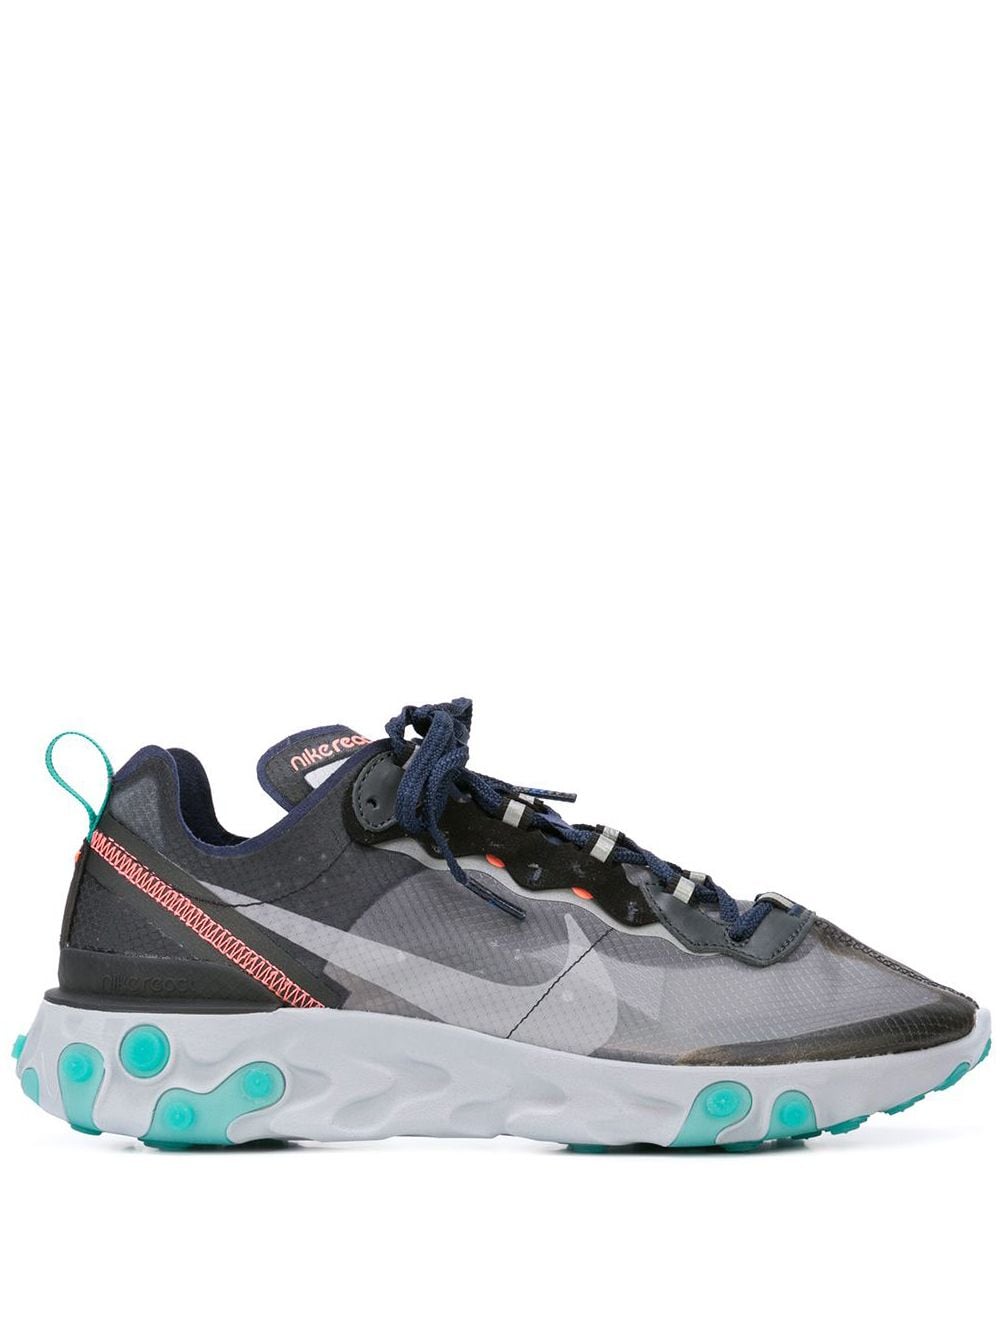 Nike multicolour React Element 87 sneakers for men | AQ1090005 at  Farfetch.com